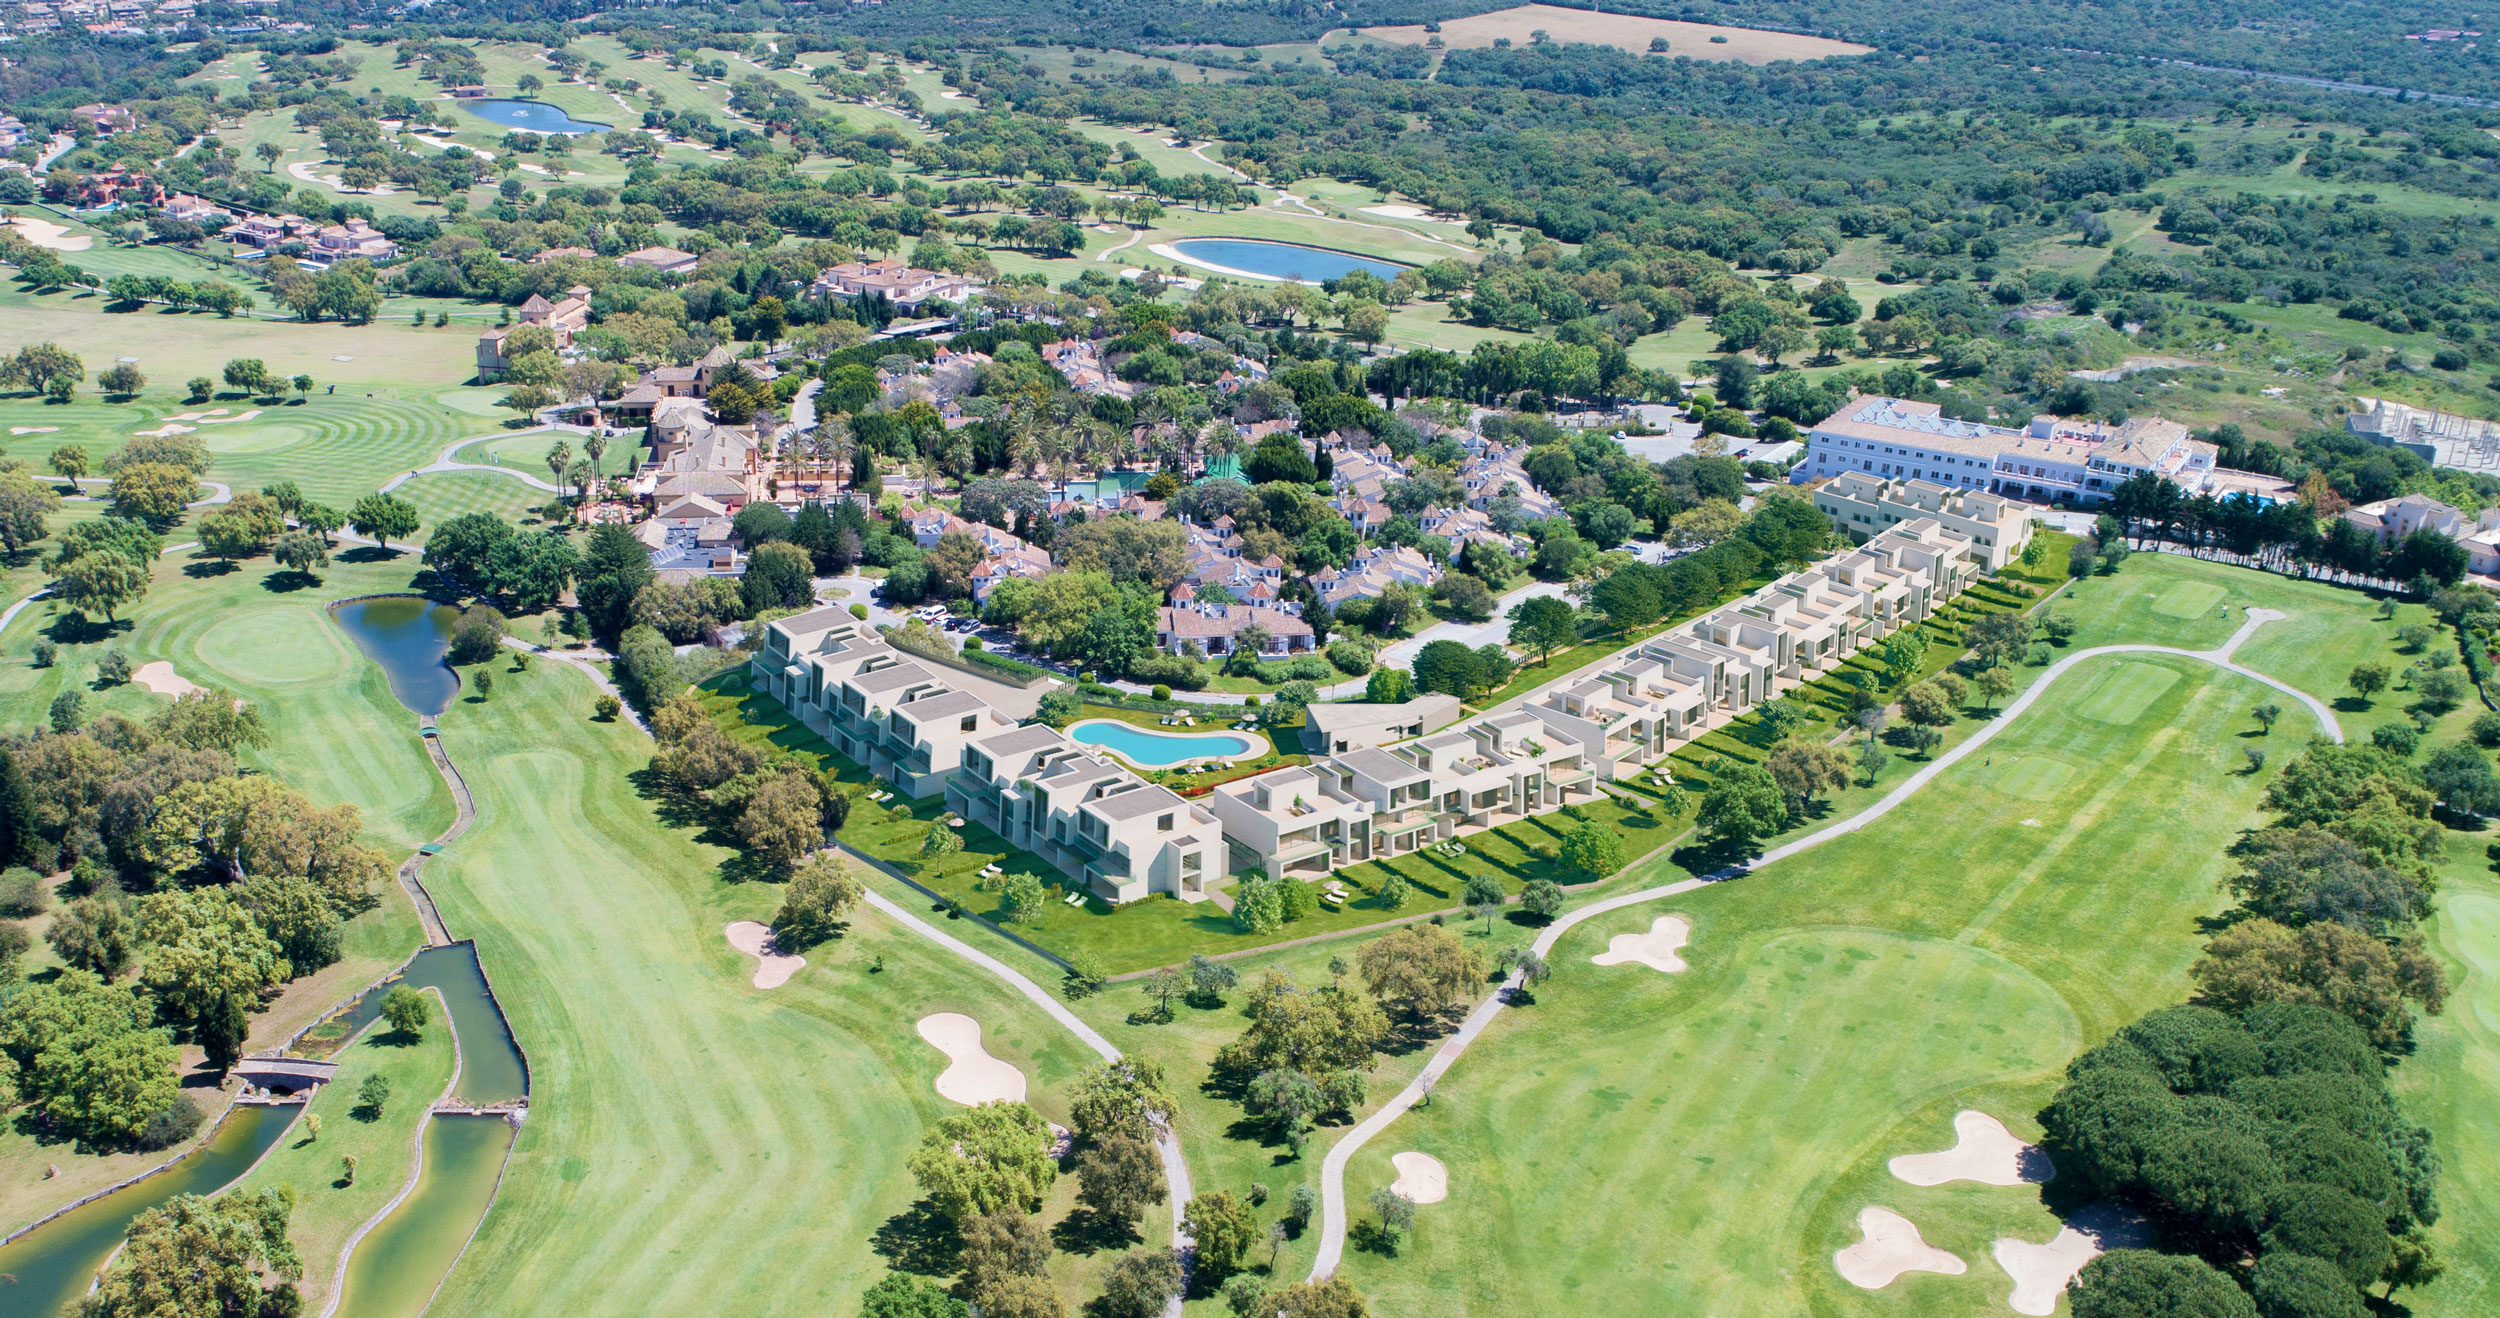 Exclusive terraced houses surrounded by a golf course